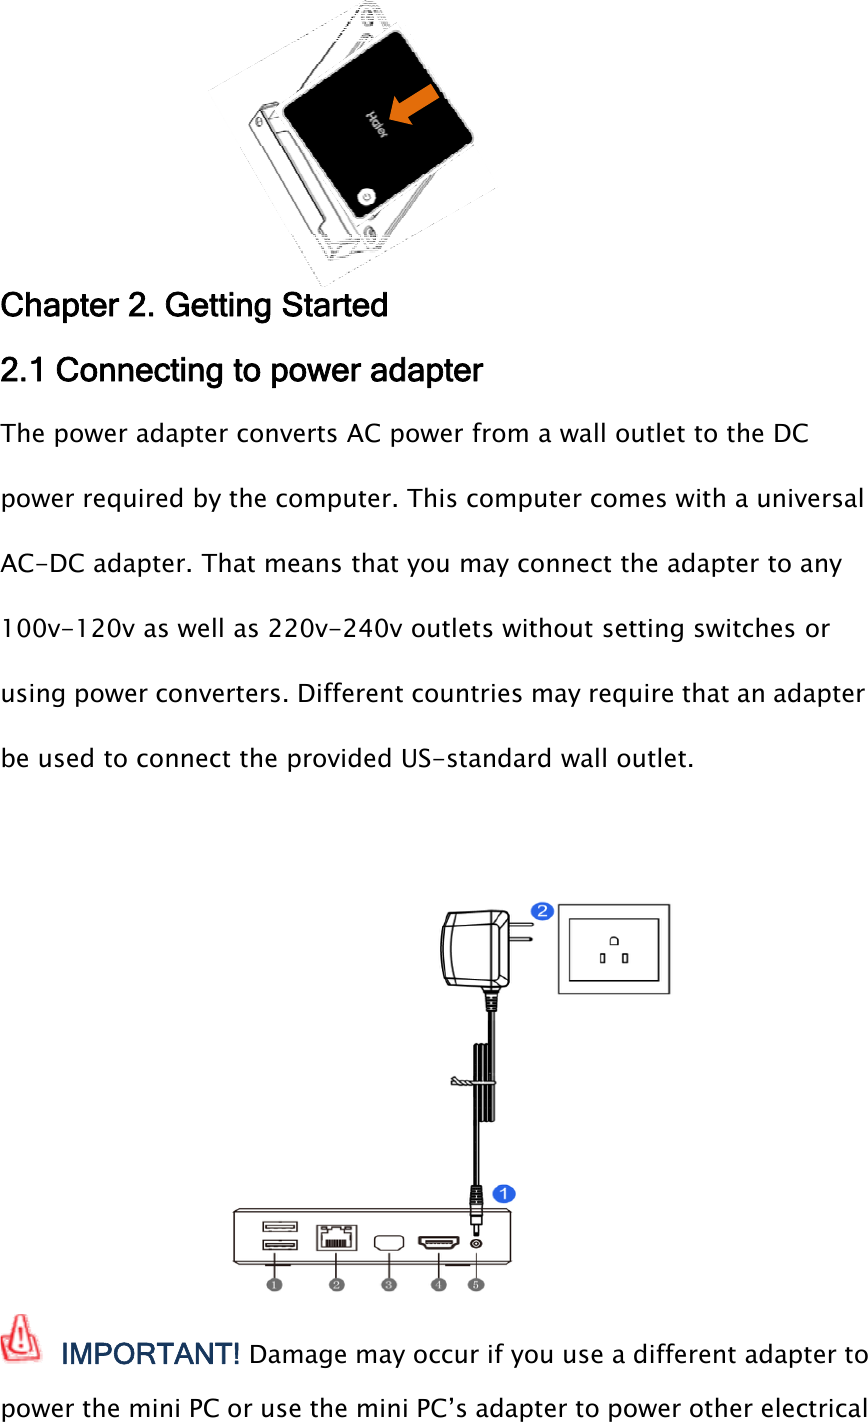 Chapter 2. Getting Started2.1 Connecting to power adapterThe power adapter converts AC power from a wall outlet to the DCpower required by the computer. This computer comes with a universalAC-DC adapter. That means that you may connect the adapter to any100v-120v as well as 220v-240v outlets without setting switches orusing power converters. Different countries may require that an adapterbe used to connect the provided US-standard wall outlet.IMPORTANT! Damage may occur if you use a different adapter topower the mini PC or use the mini PC’s adapter to power other electrical